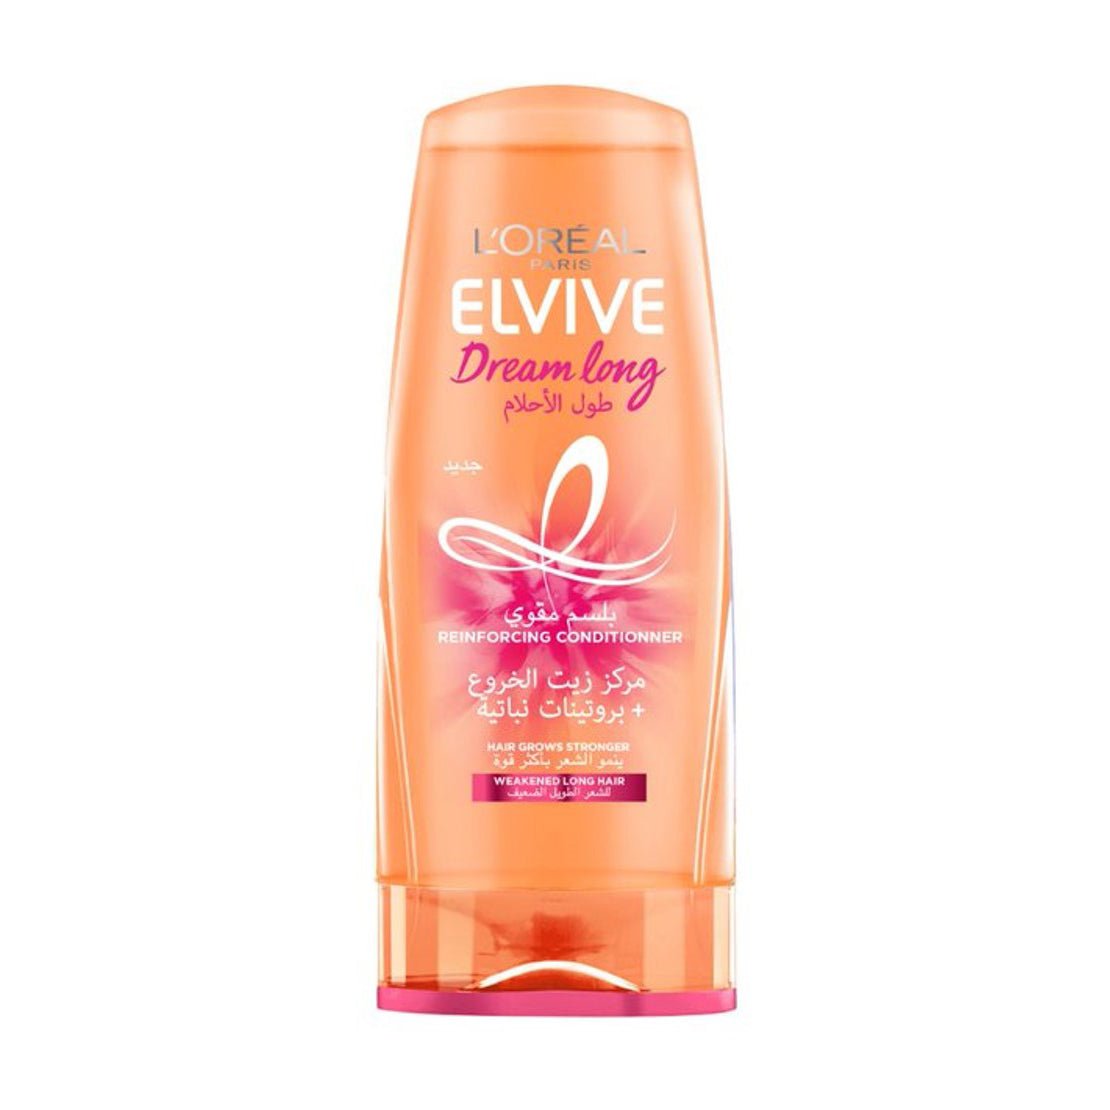 L’Oreal Elvive Dream Long Conditioner - Bloom Pharmacy